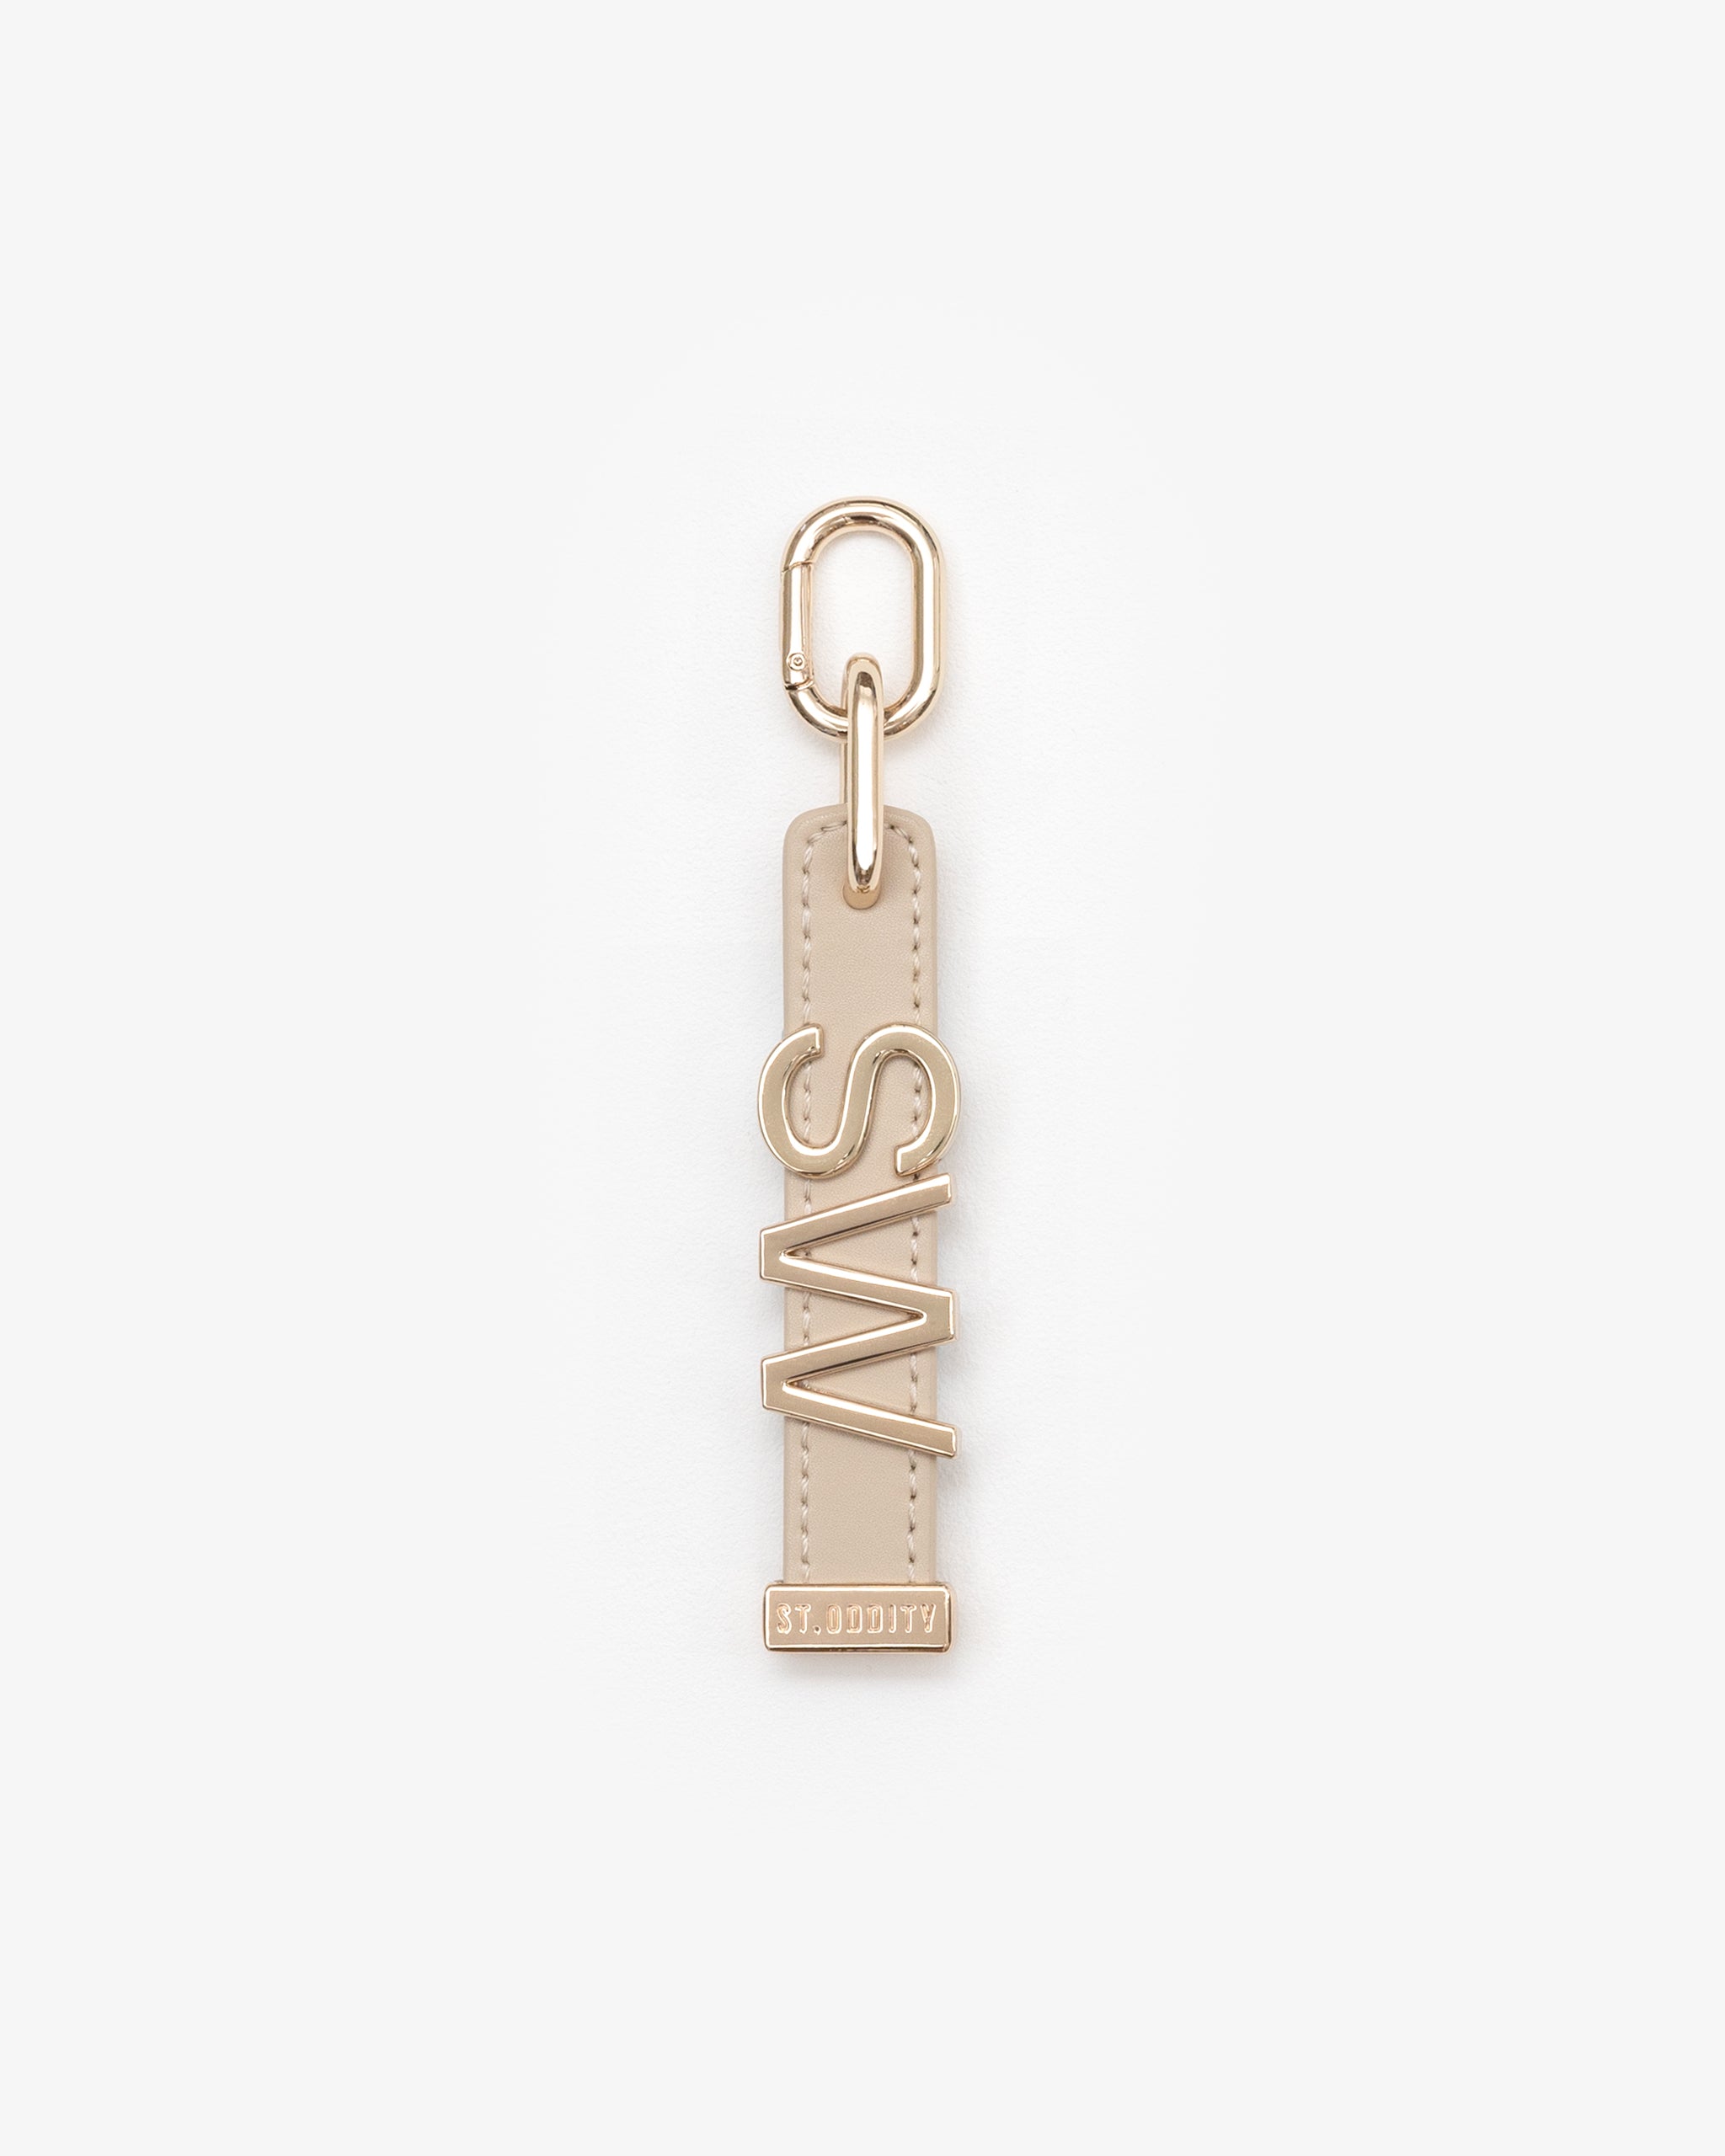 Charm in Light Sand with Personalised Hardware